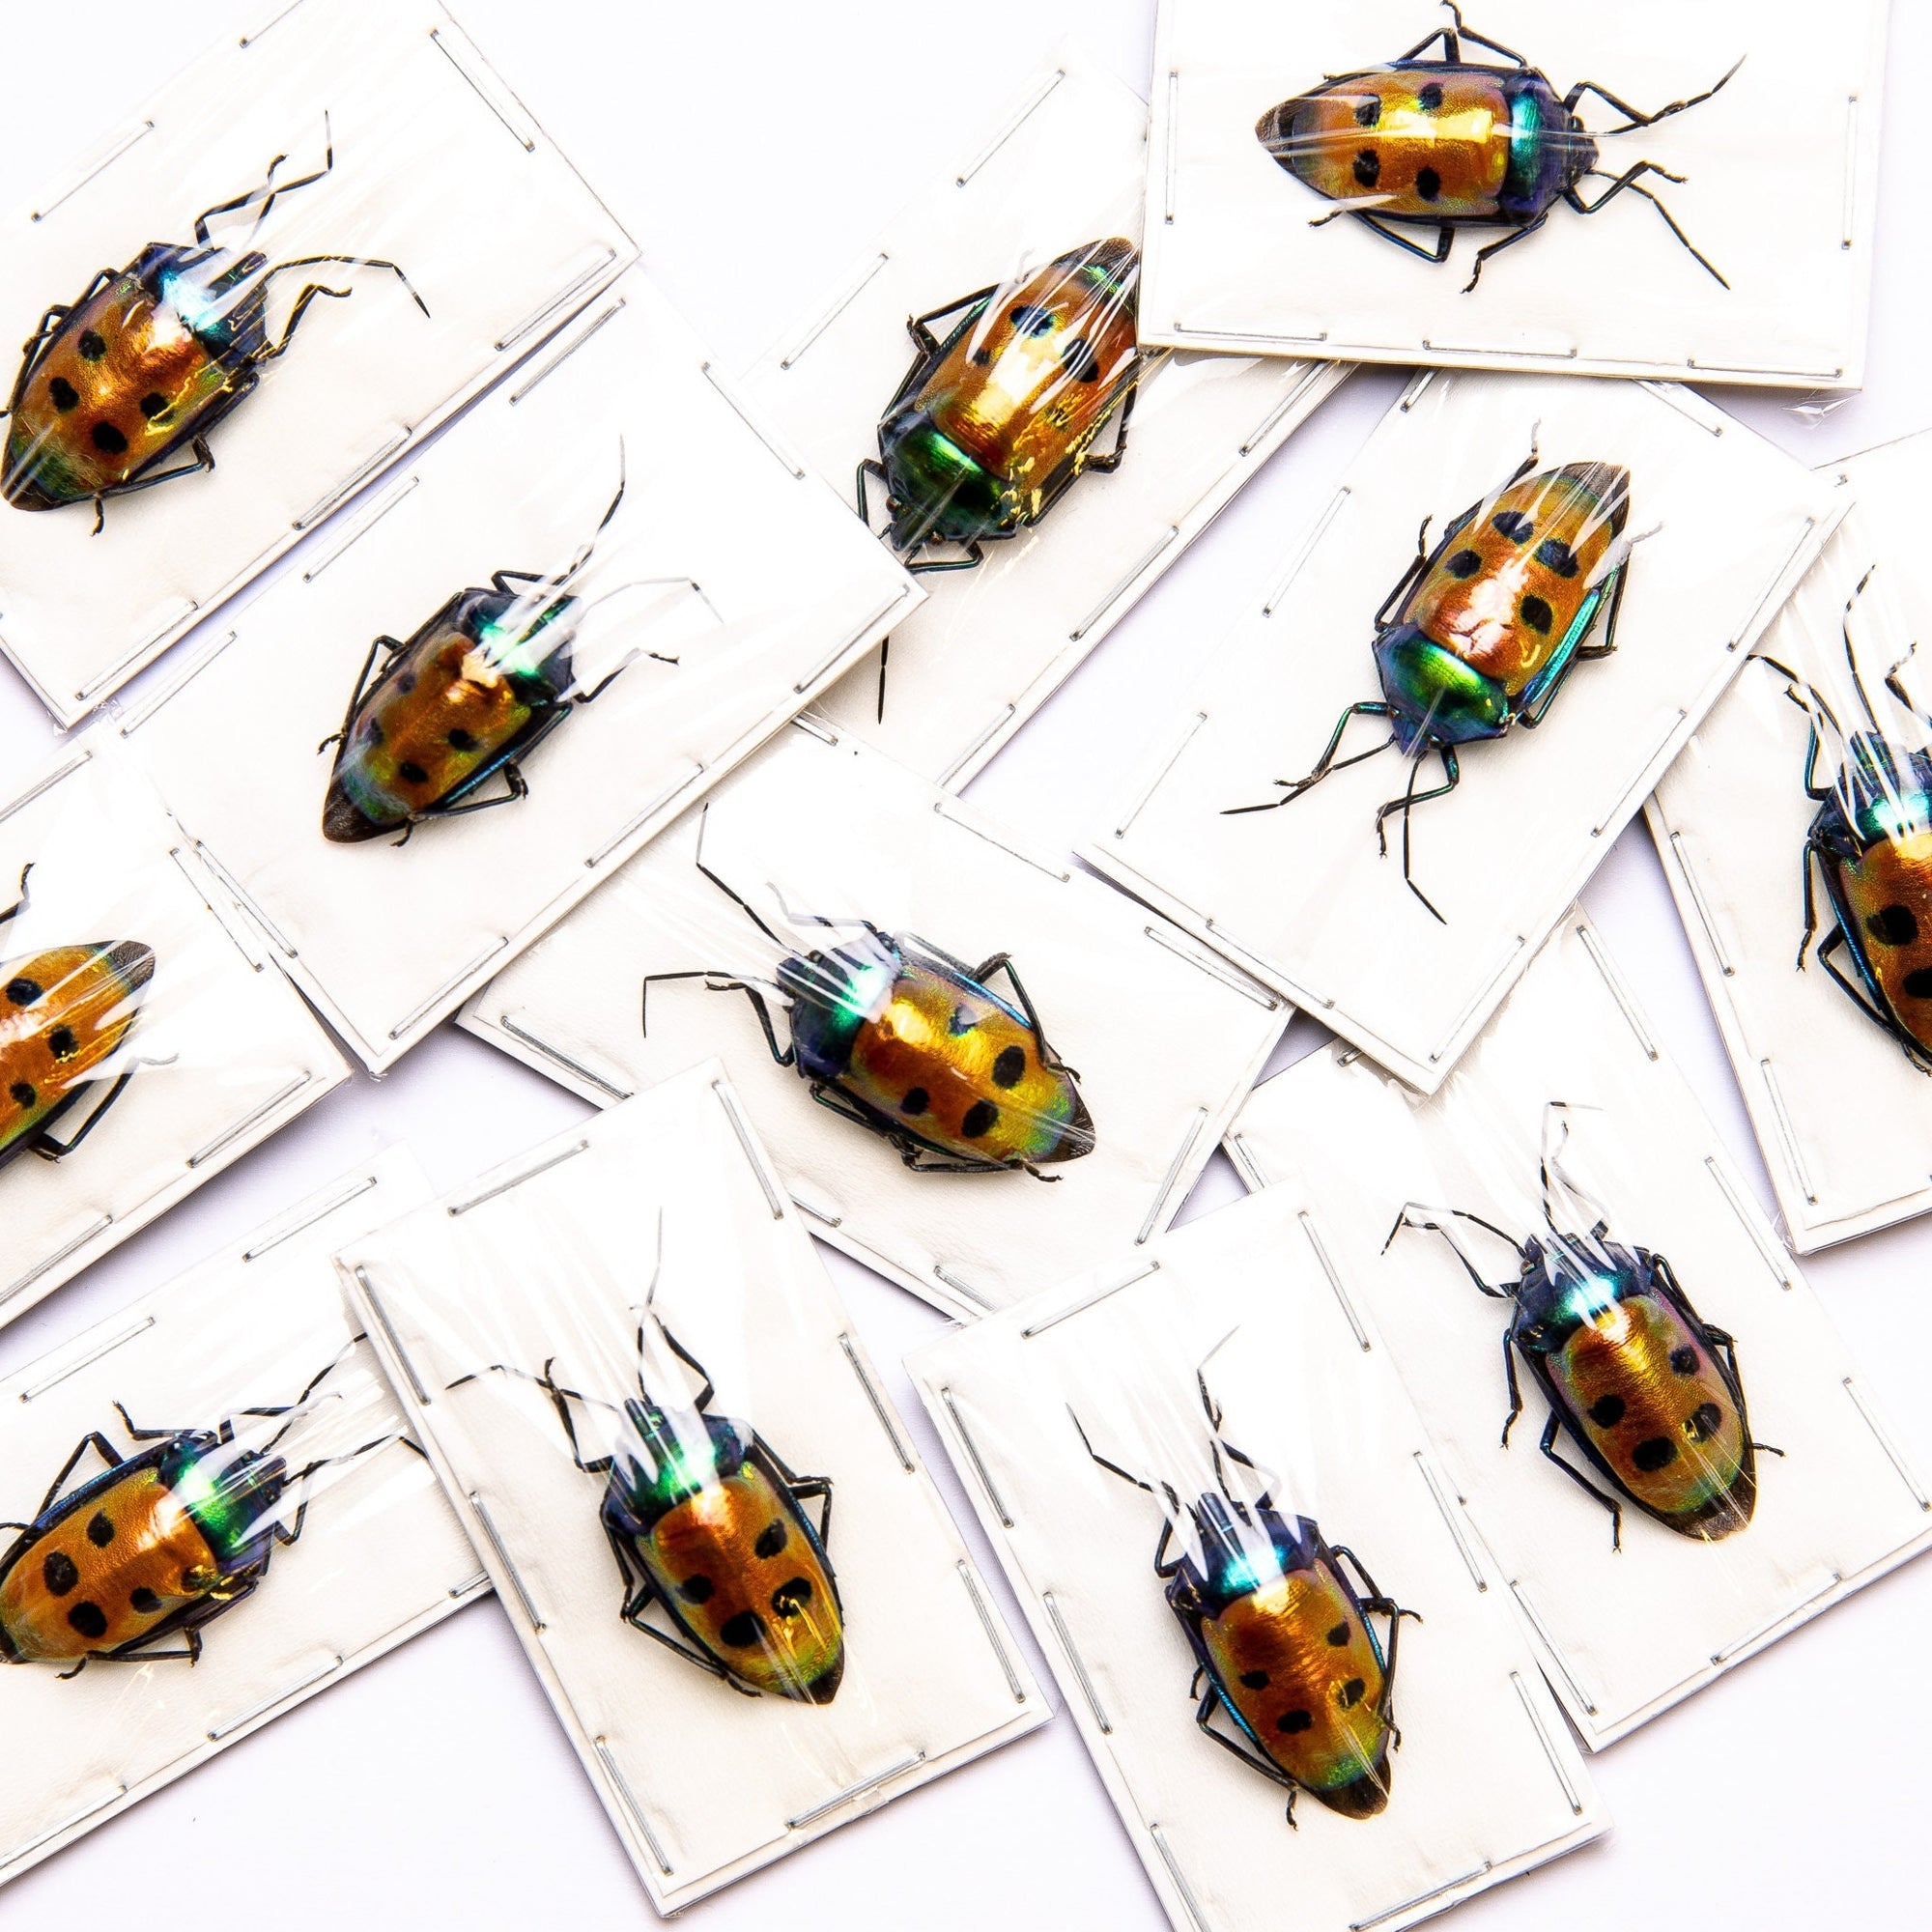 Pack of 10 Jewel Bugs (Calliphara caesar) Indonesia, A1 Real Entomology Specimens